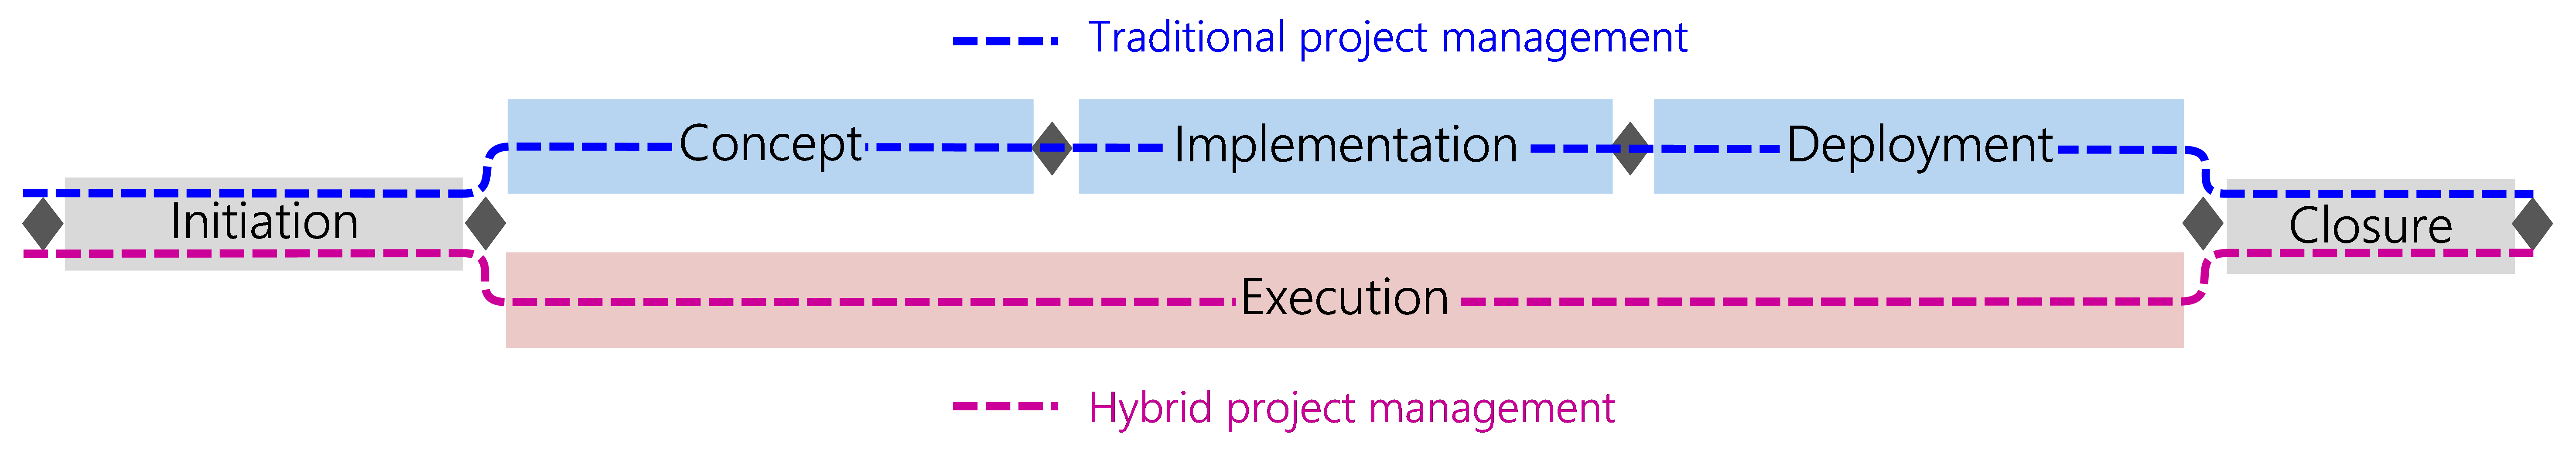 Figure 32: HERMES offers traditional and hybrid project management